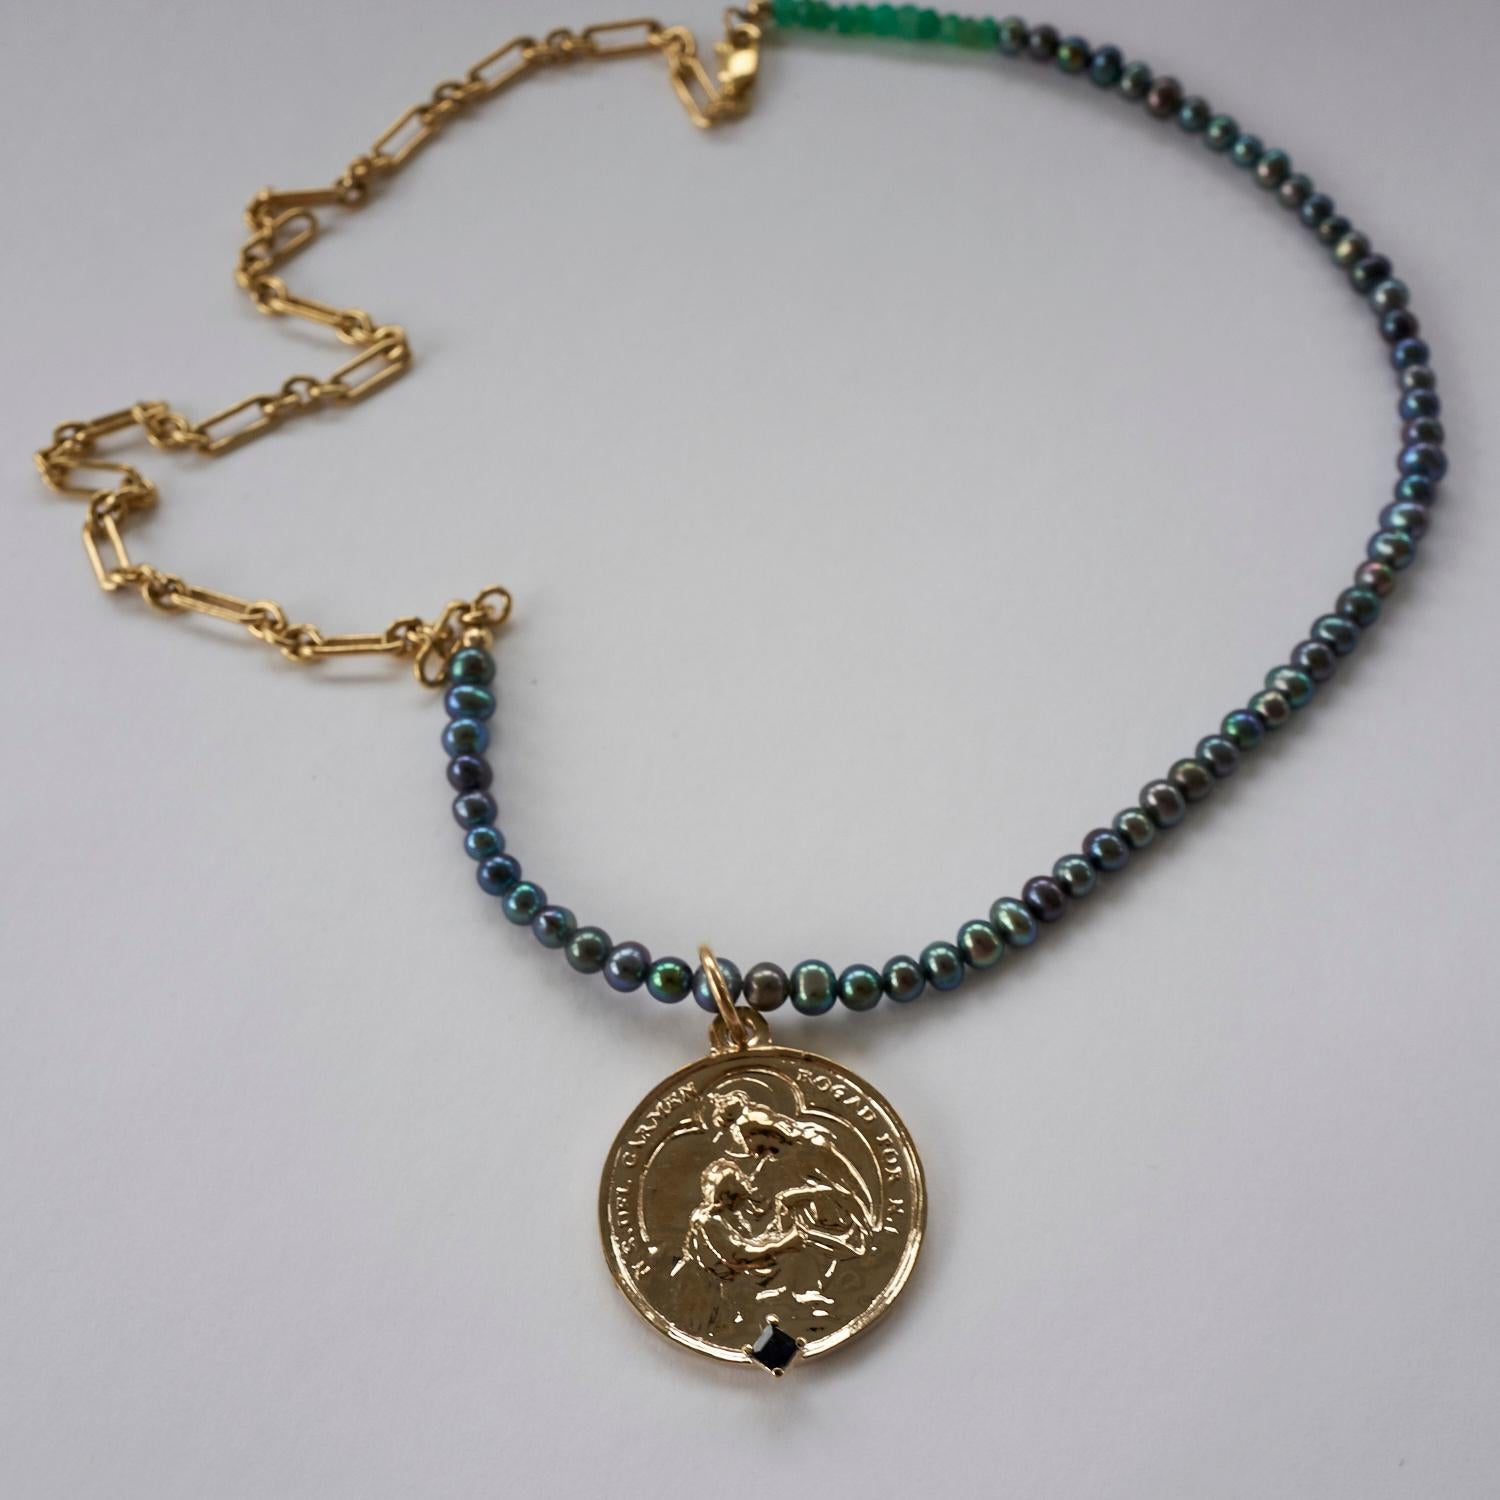 Sapphire Virgin del Carmen Black Pearl Medal Coin Pendant Chain Necklace J Dauphin

This necklace features a medal of the Virgin Del Carmen adorned with a square-cut blue sapphire, suspended from a striking black pearl bead necklace. The blue